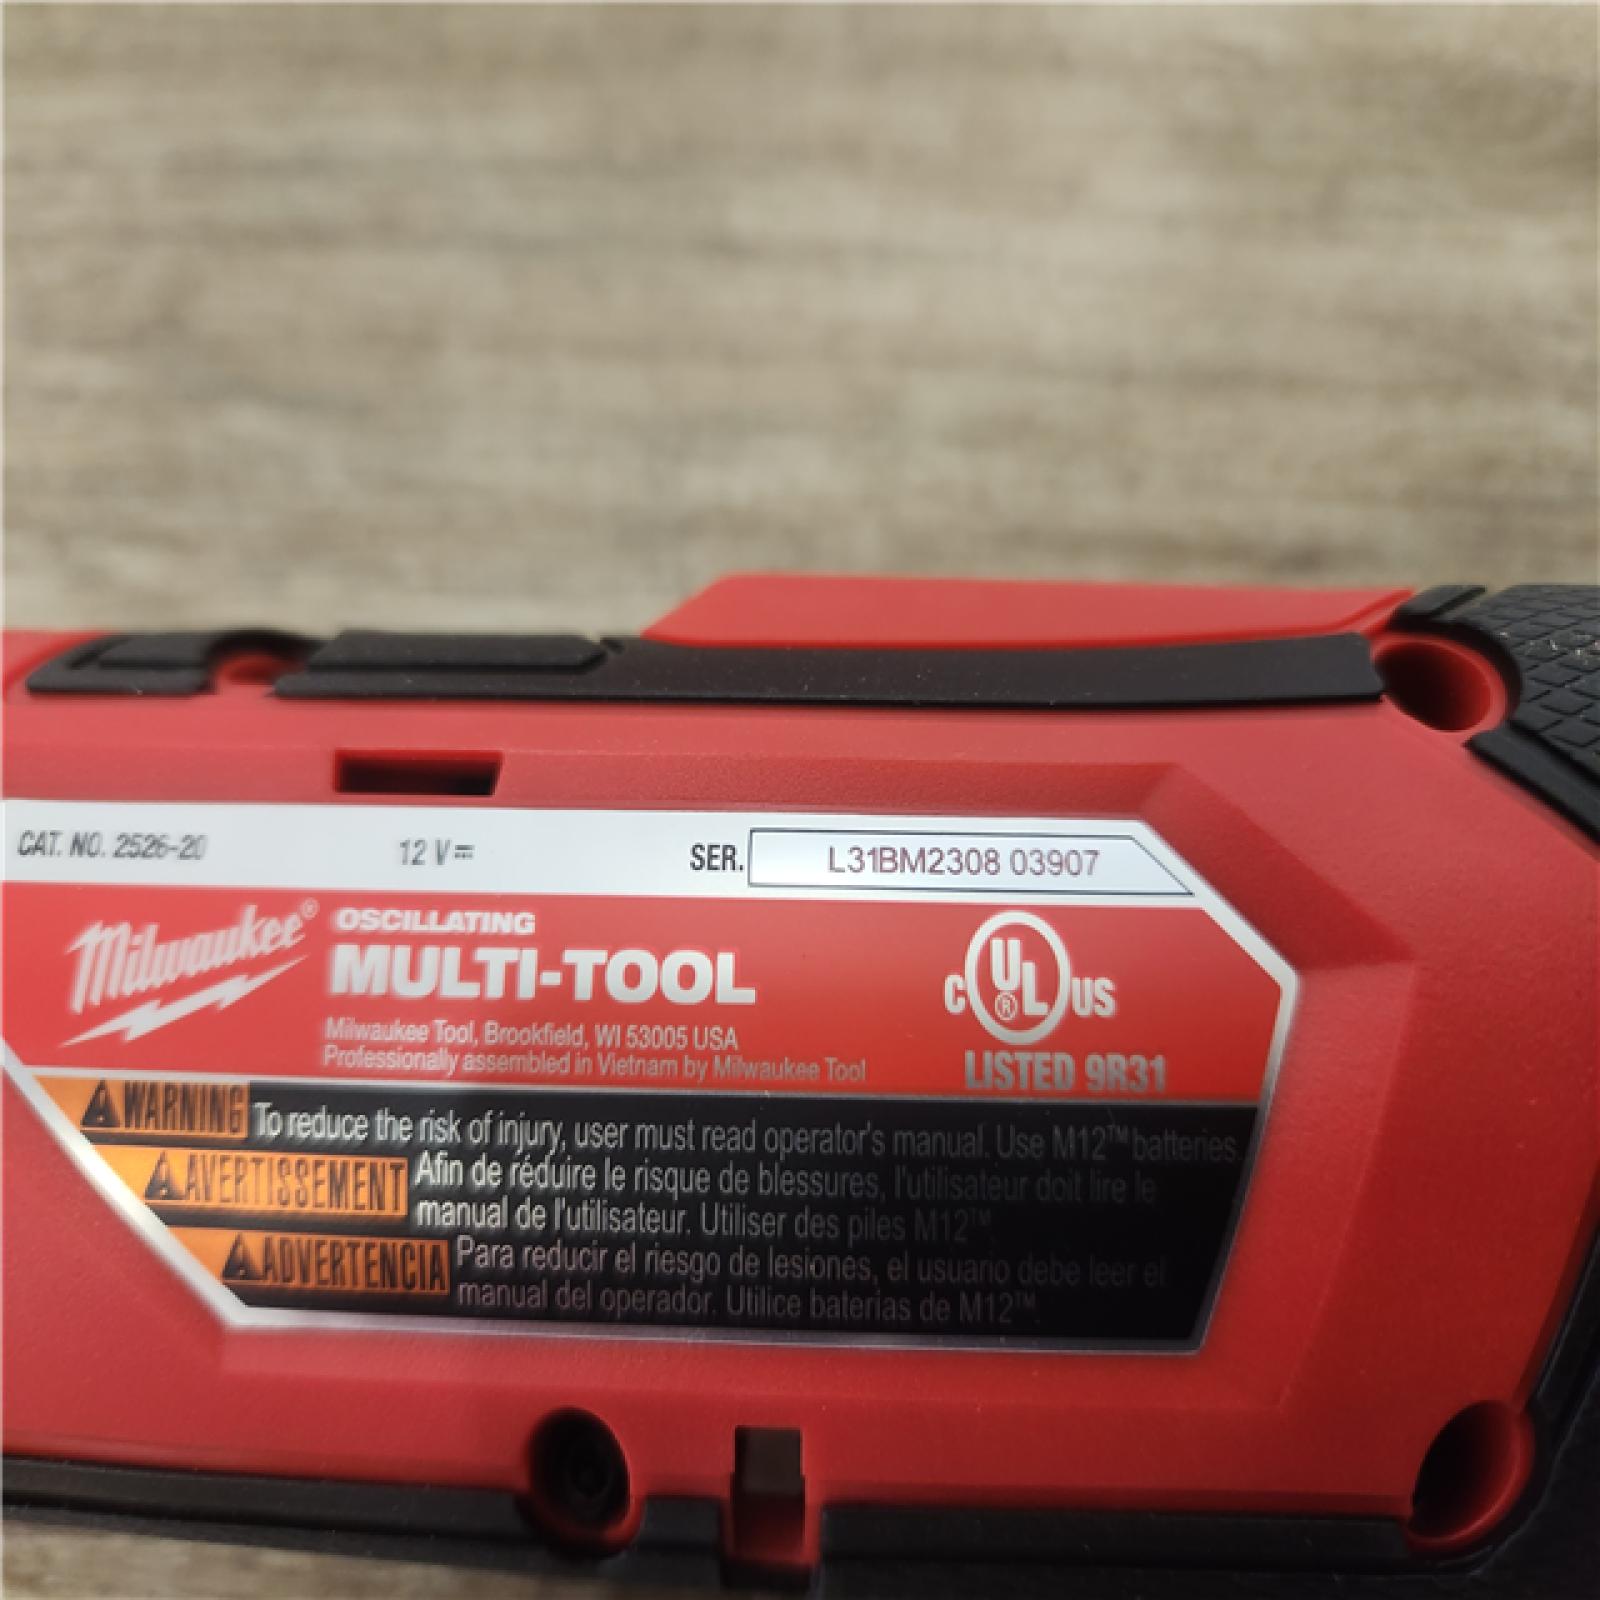 Phoenix Location NEW Milwaukee M12 FUEL 12V Lithium-Ion Cordless Oscillating Multi-Tool (Tool-Only)